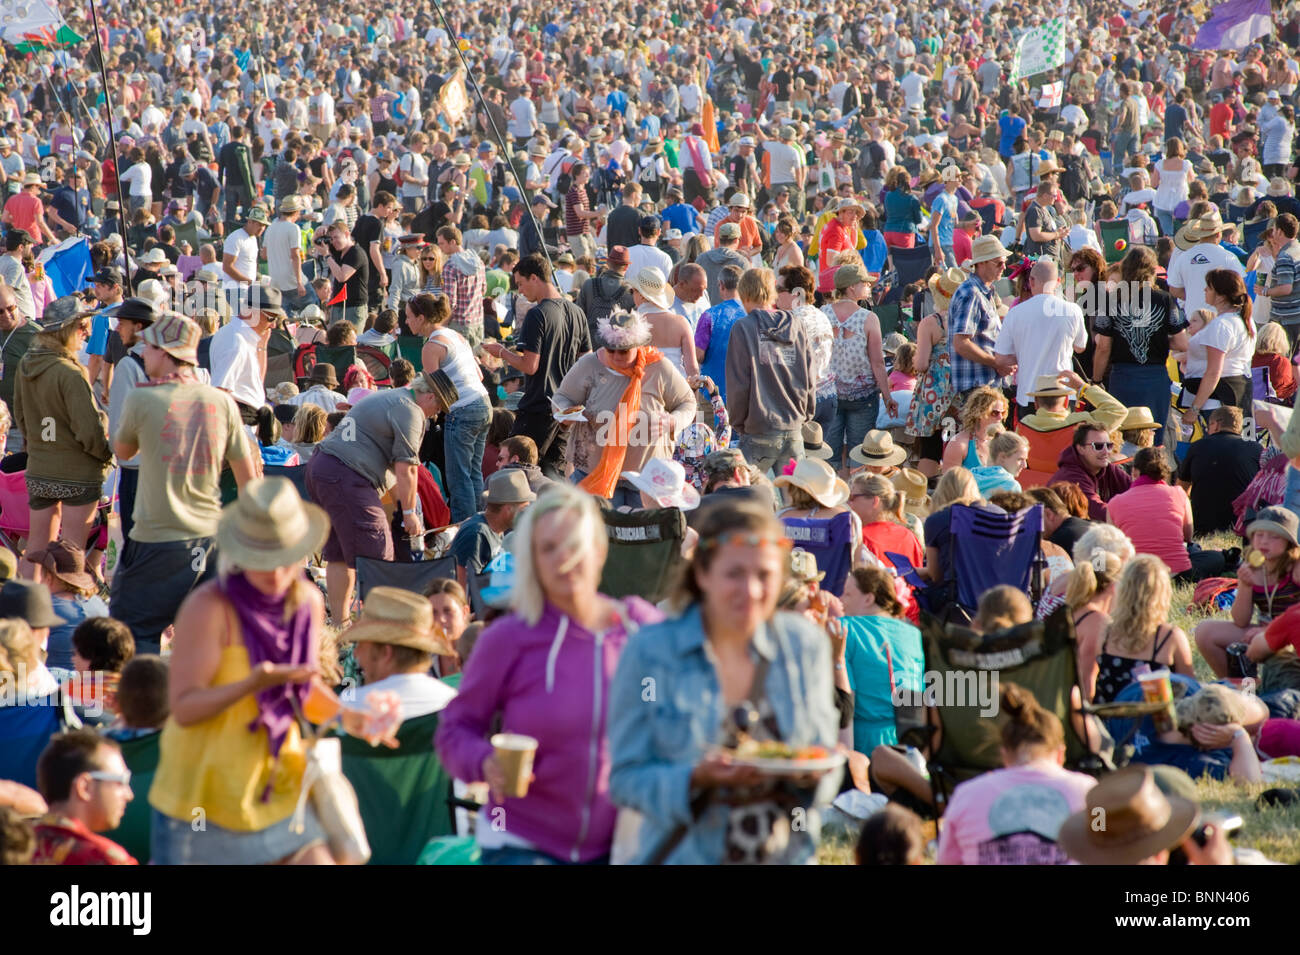 Crowds of people at the Glastonbury Festival, Somerset, England. Stock Photo